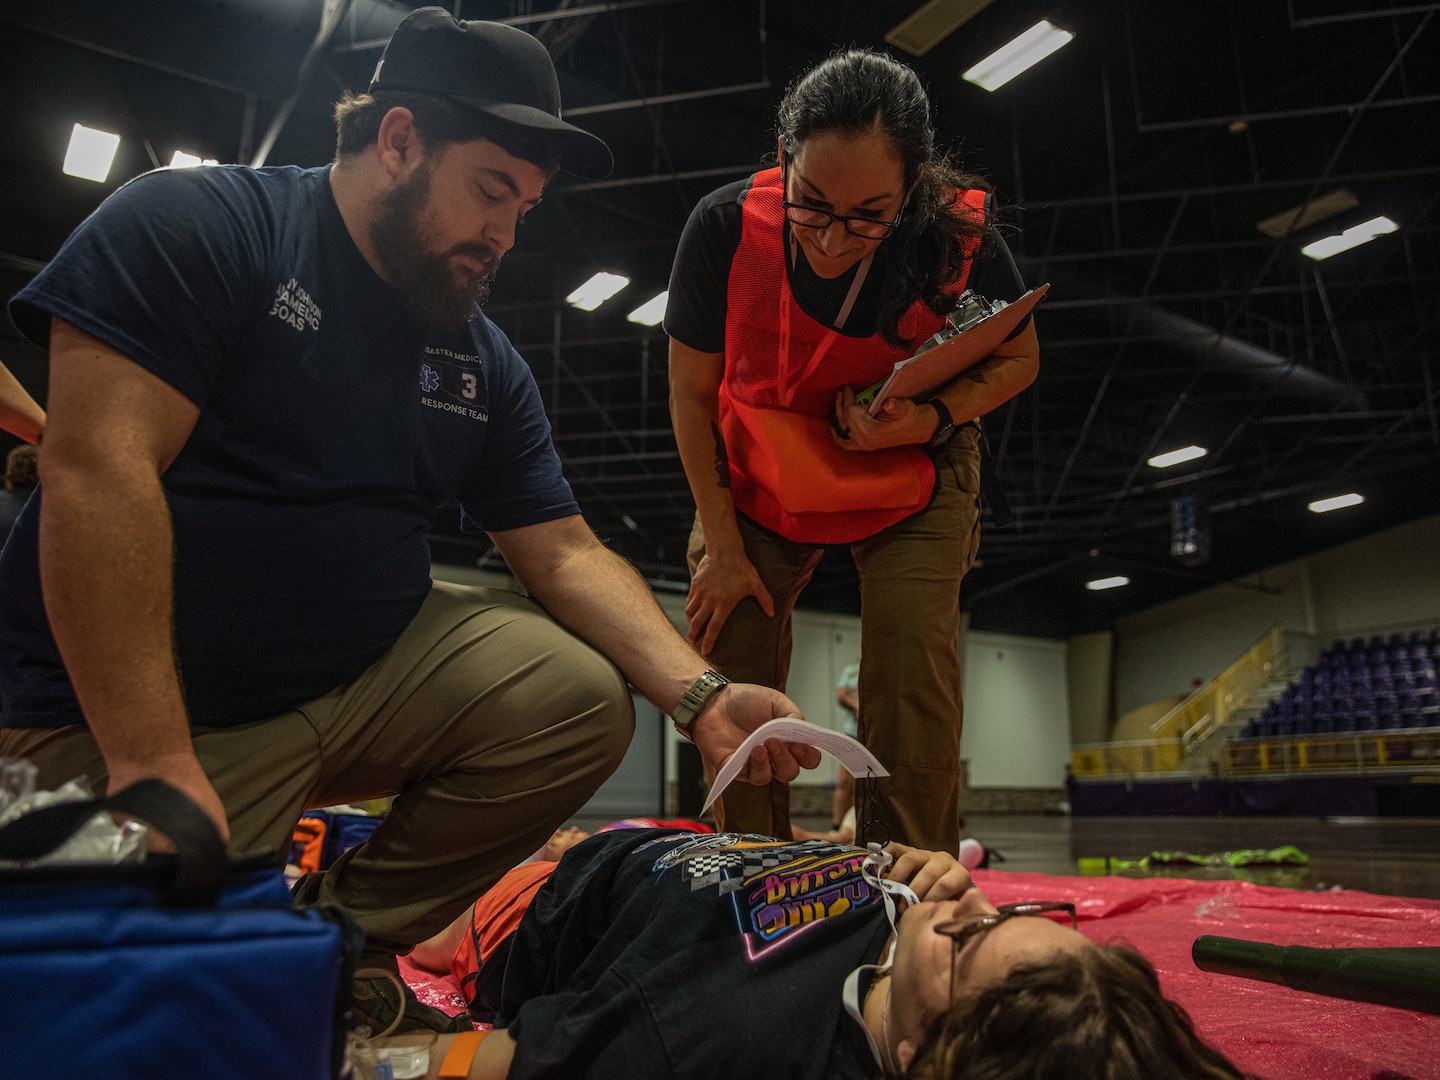 Capt. Vanessa Weaver (right), deputy state surgeon for the Oklahoma Army National Guard, assists an emergency medical technician during a Regional Emergency Medical Services System training event at the Choctaw Event Center in Durant, Oklahoma, September 21, 2022.  A total of around 170 first responders participated in this annual training event. (Oklahoma National Guard Photo by Sgt. Reece Heck)